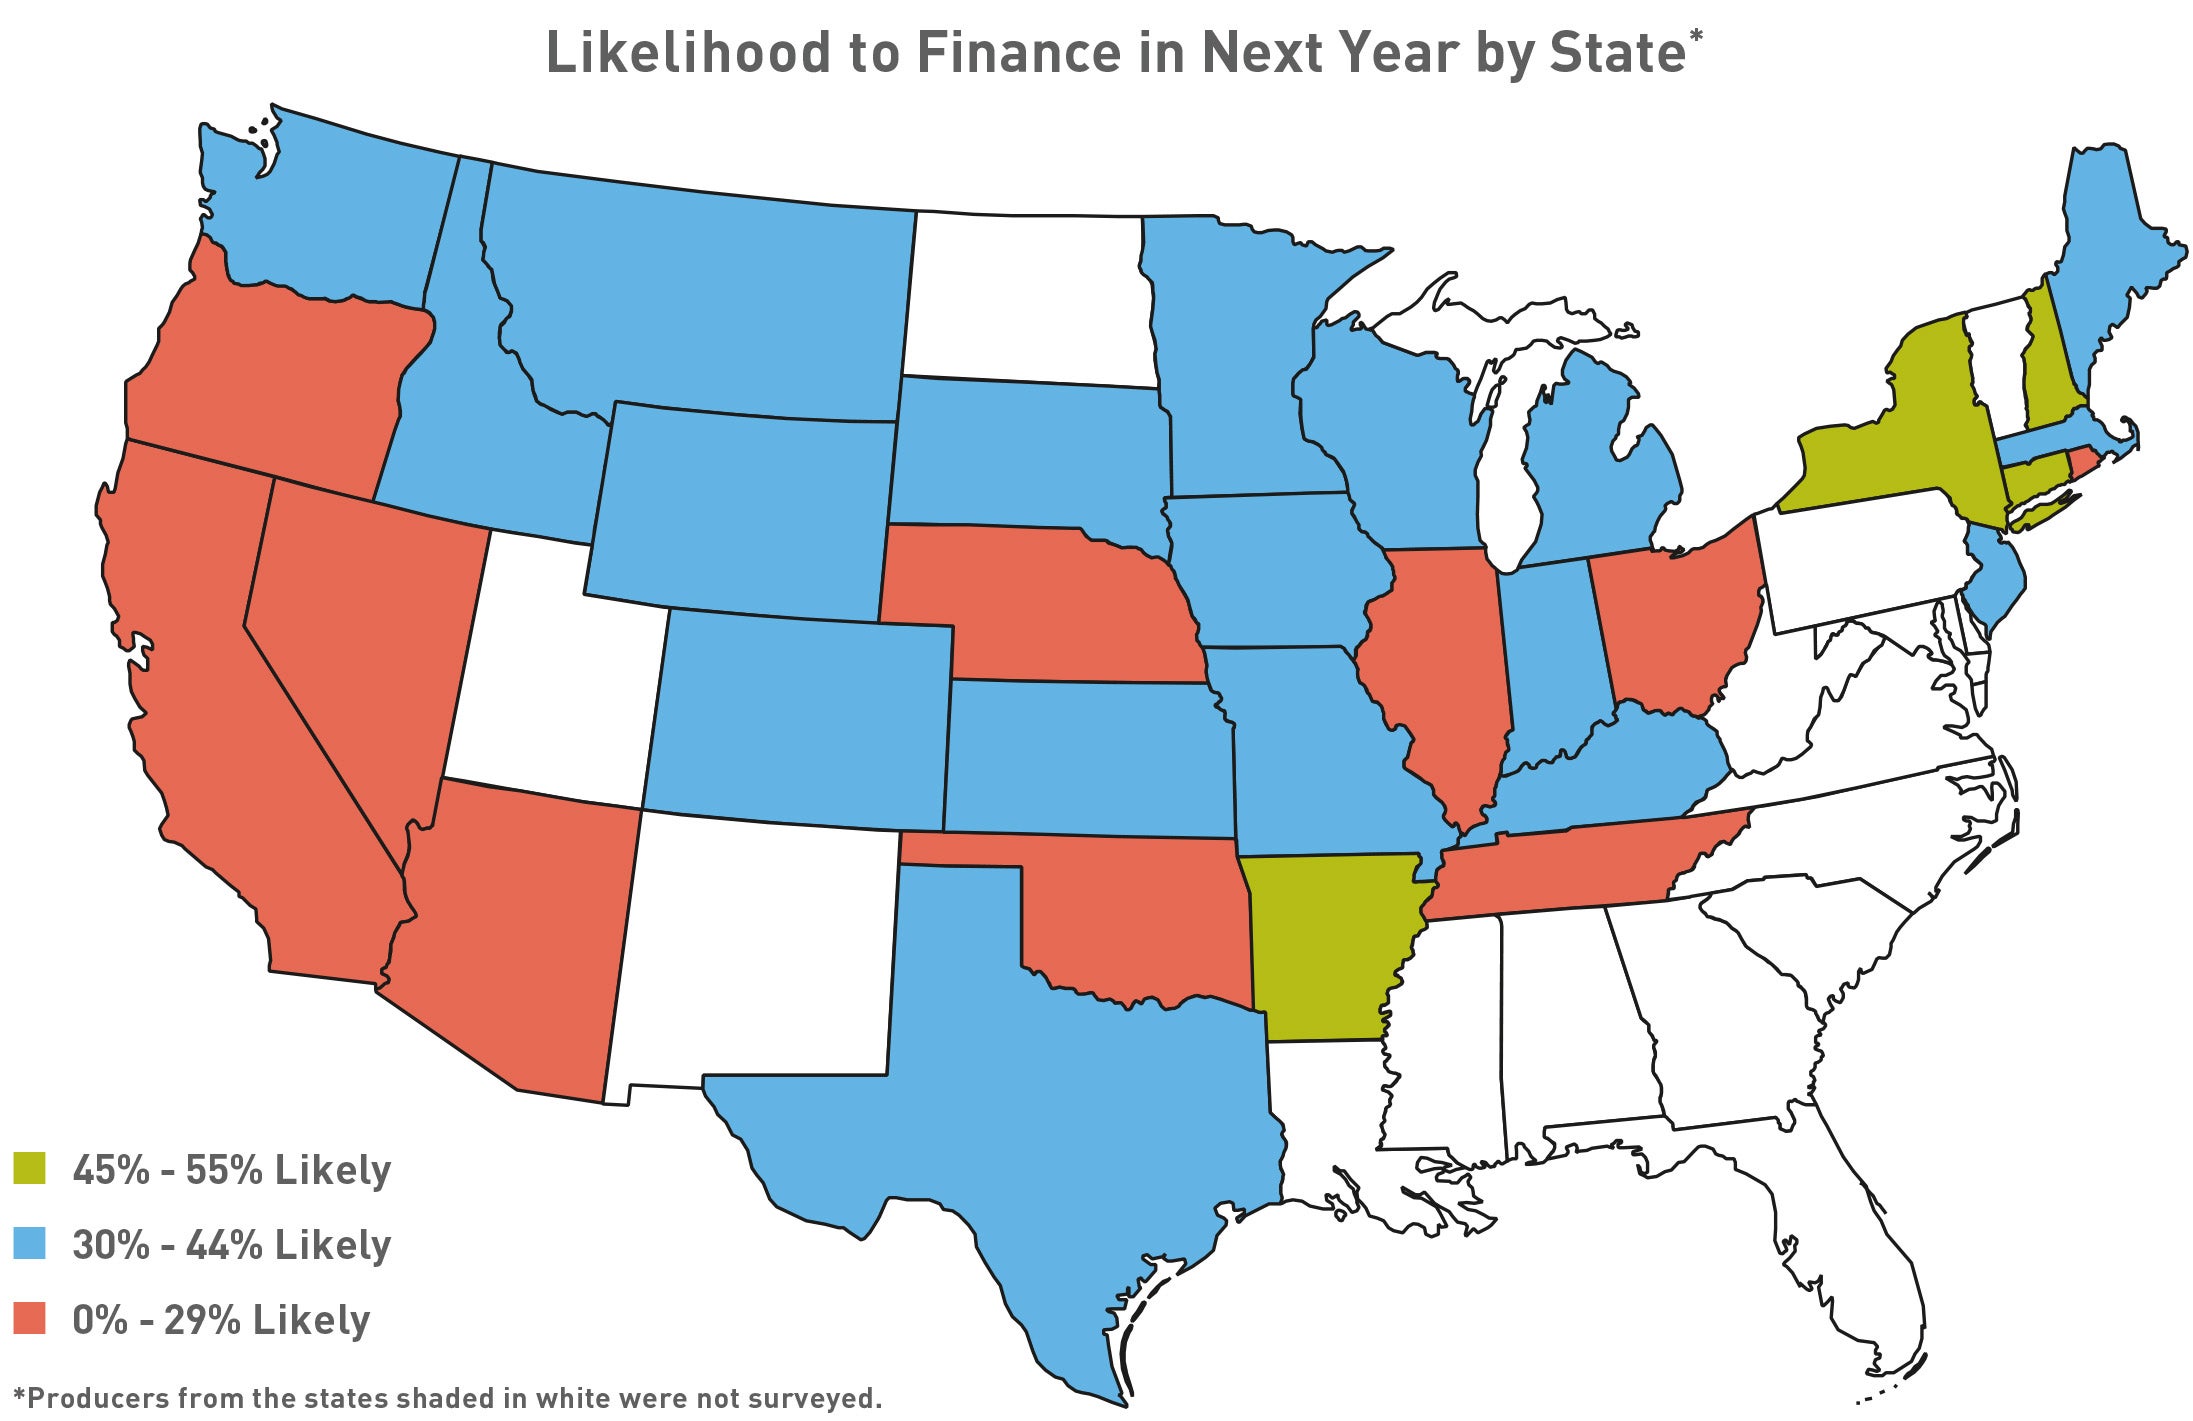 Likelihood to finance in next year by state map